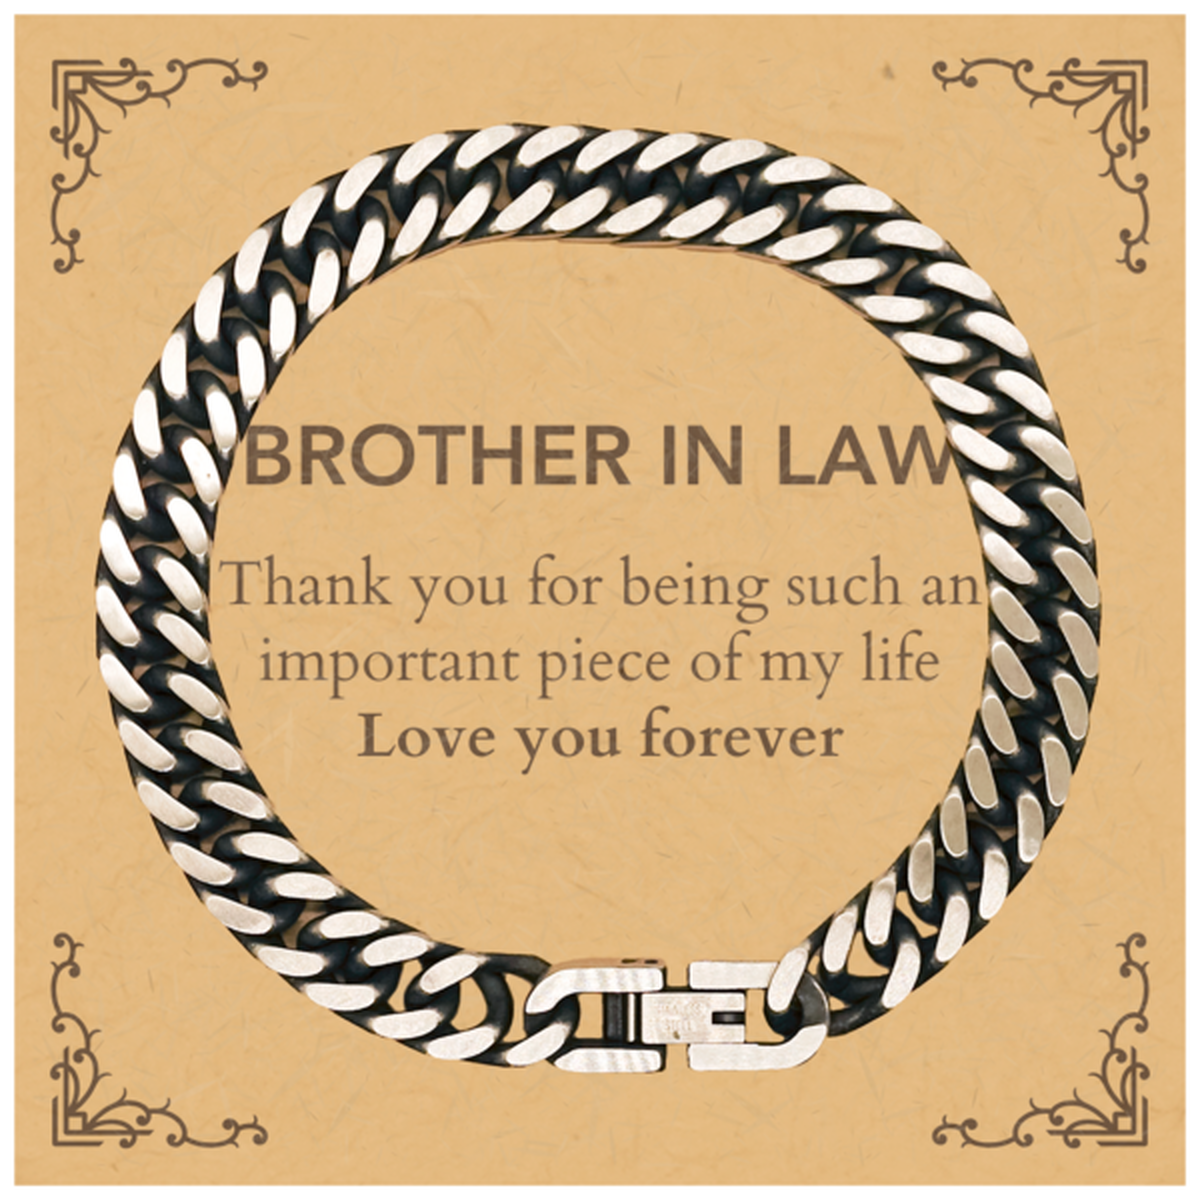 Appropriate Brother In Law Cuban Link Chain Bracelet Epic Birthday Gifts for Brother In Law Thank you for being such an important piece of my life Brother In Law Christmas Mothers Fathers Day